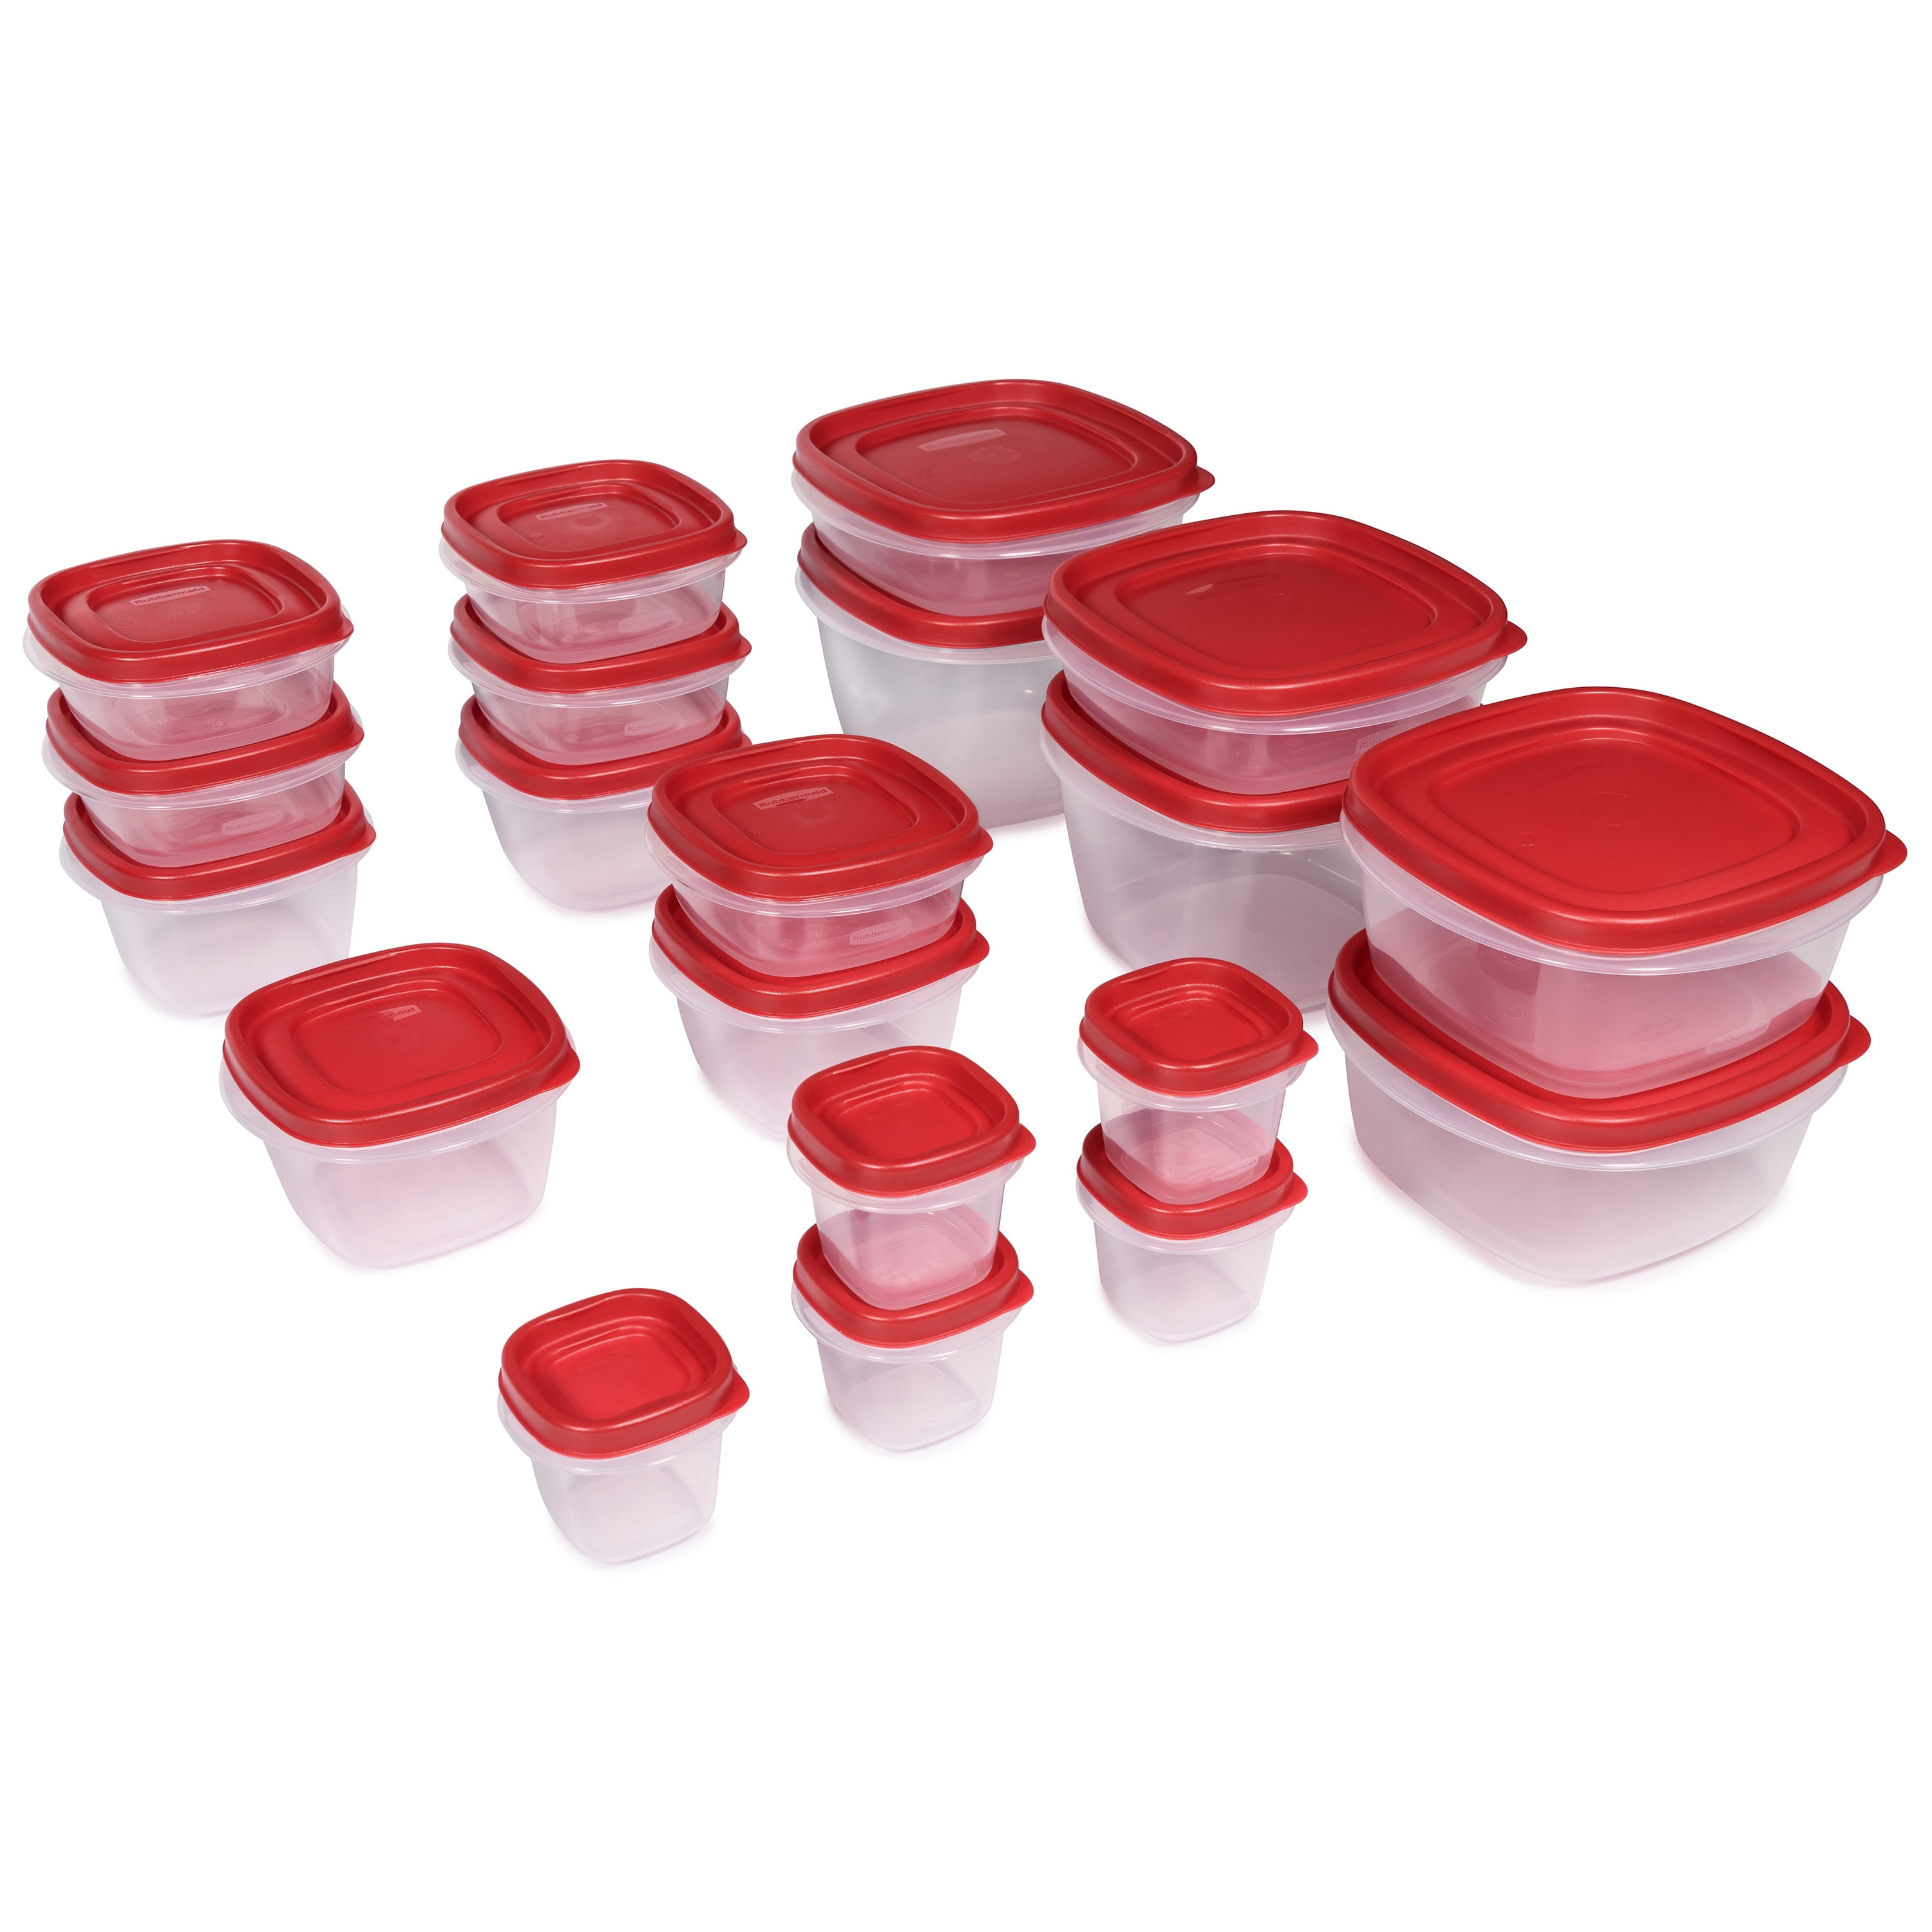 TUPPERWARE New FRESH N COOL VARIETY SET of 3 Containers Small Medium & Tall 